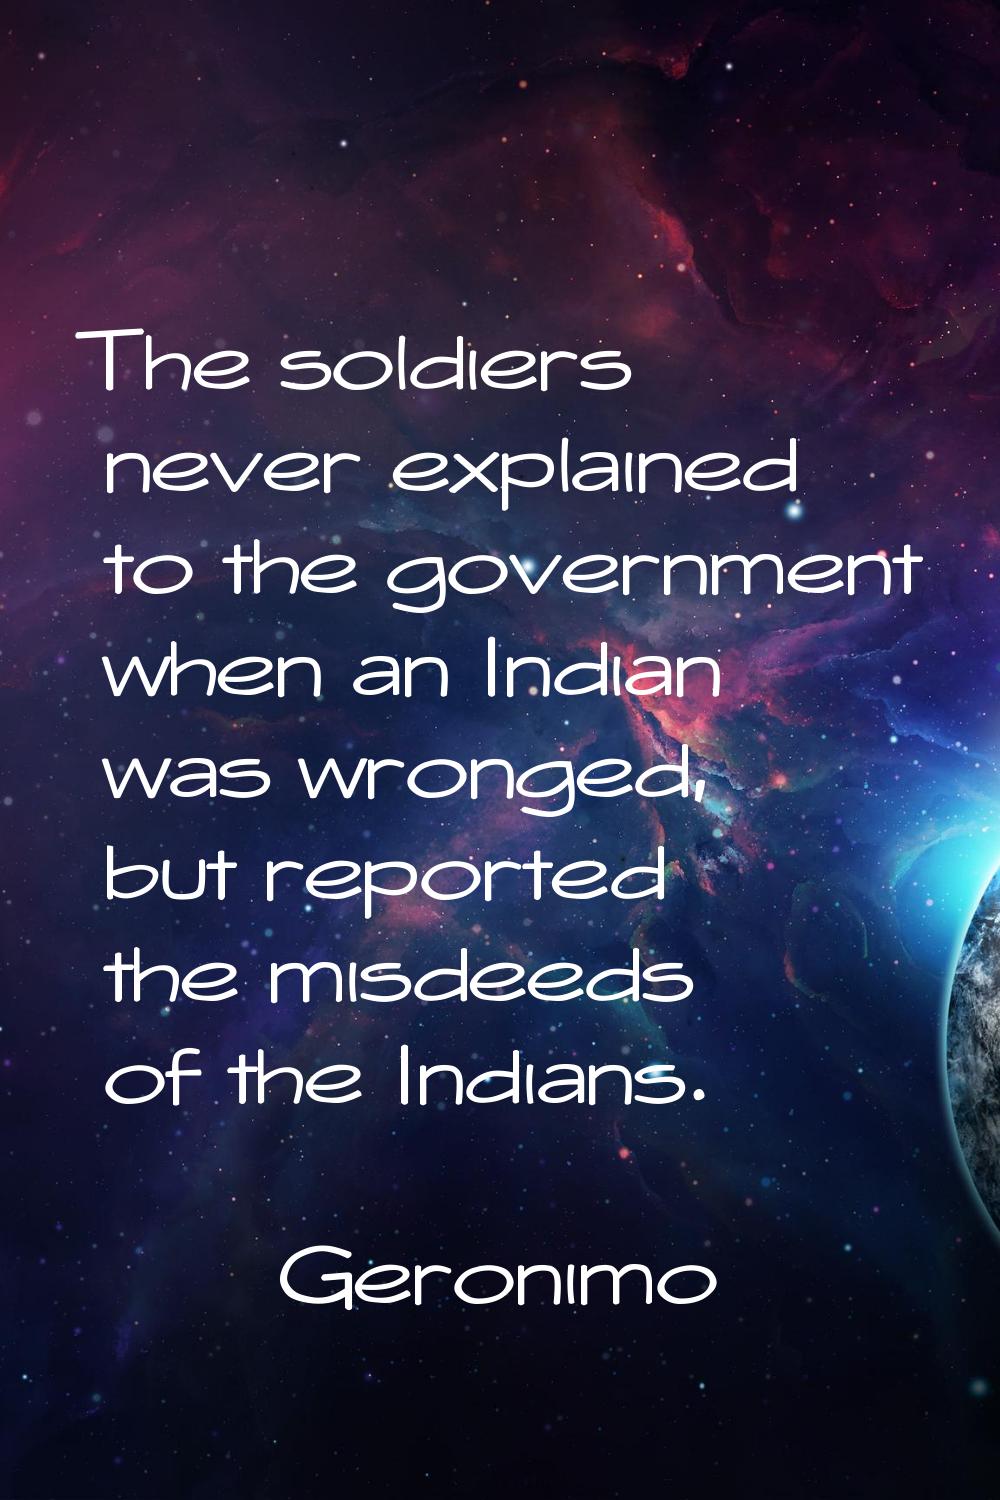 The soldiers never explained to the government when an Indian was wronged, but reported the misdeed